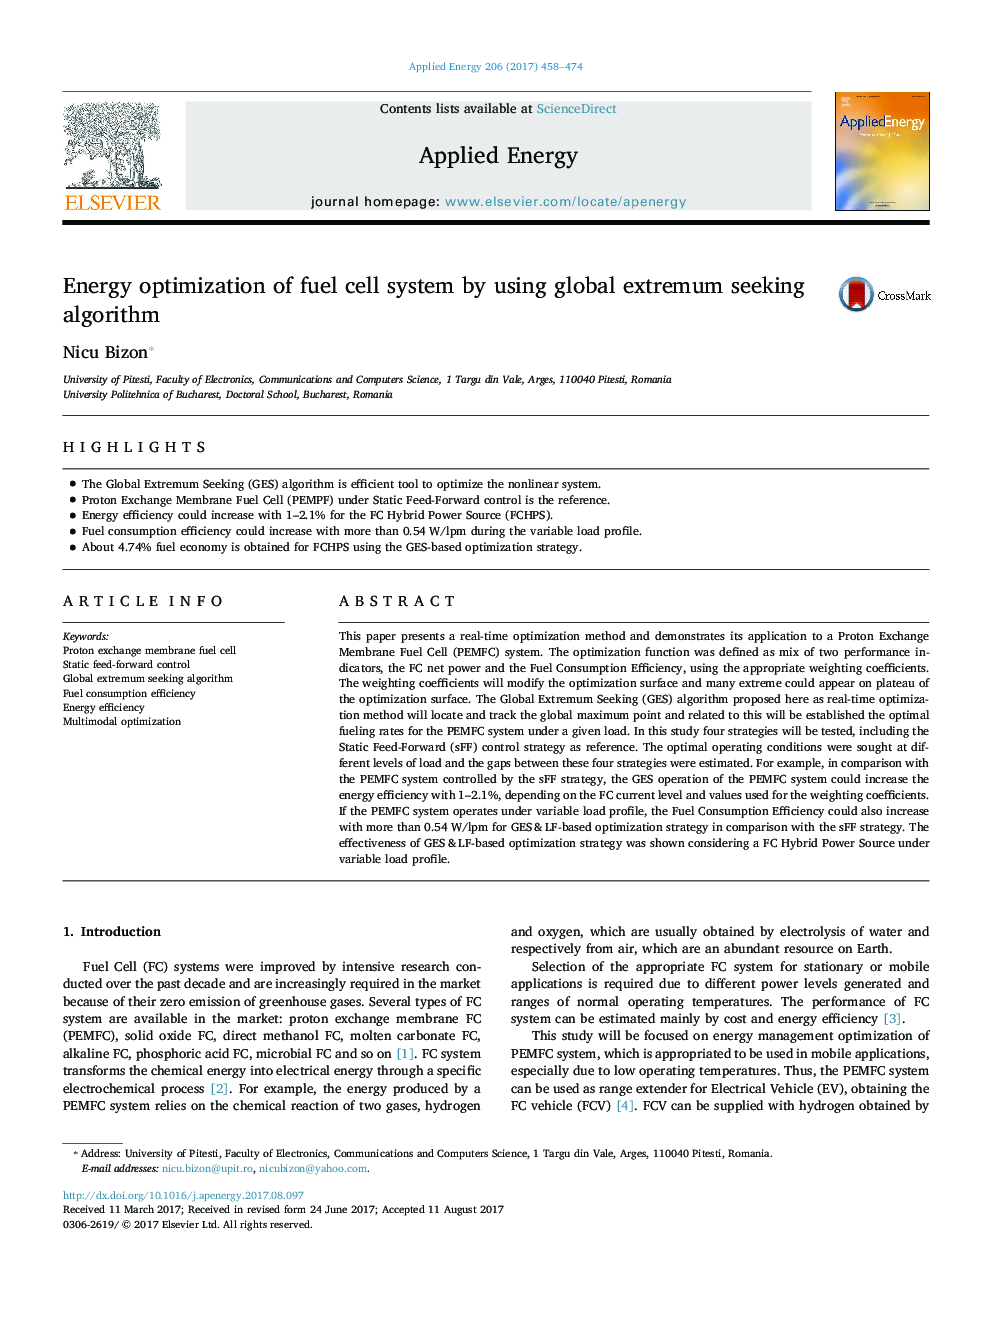 Energy optimization of fuel cell system by using global extremum seeking algorithm